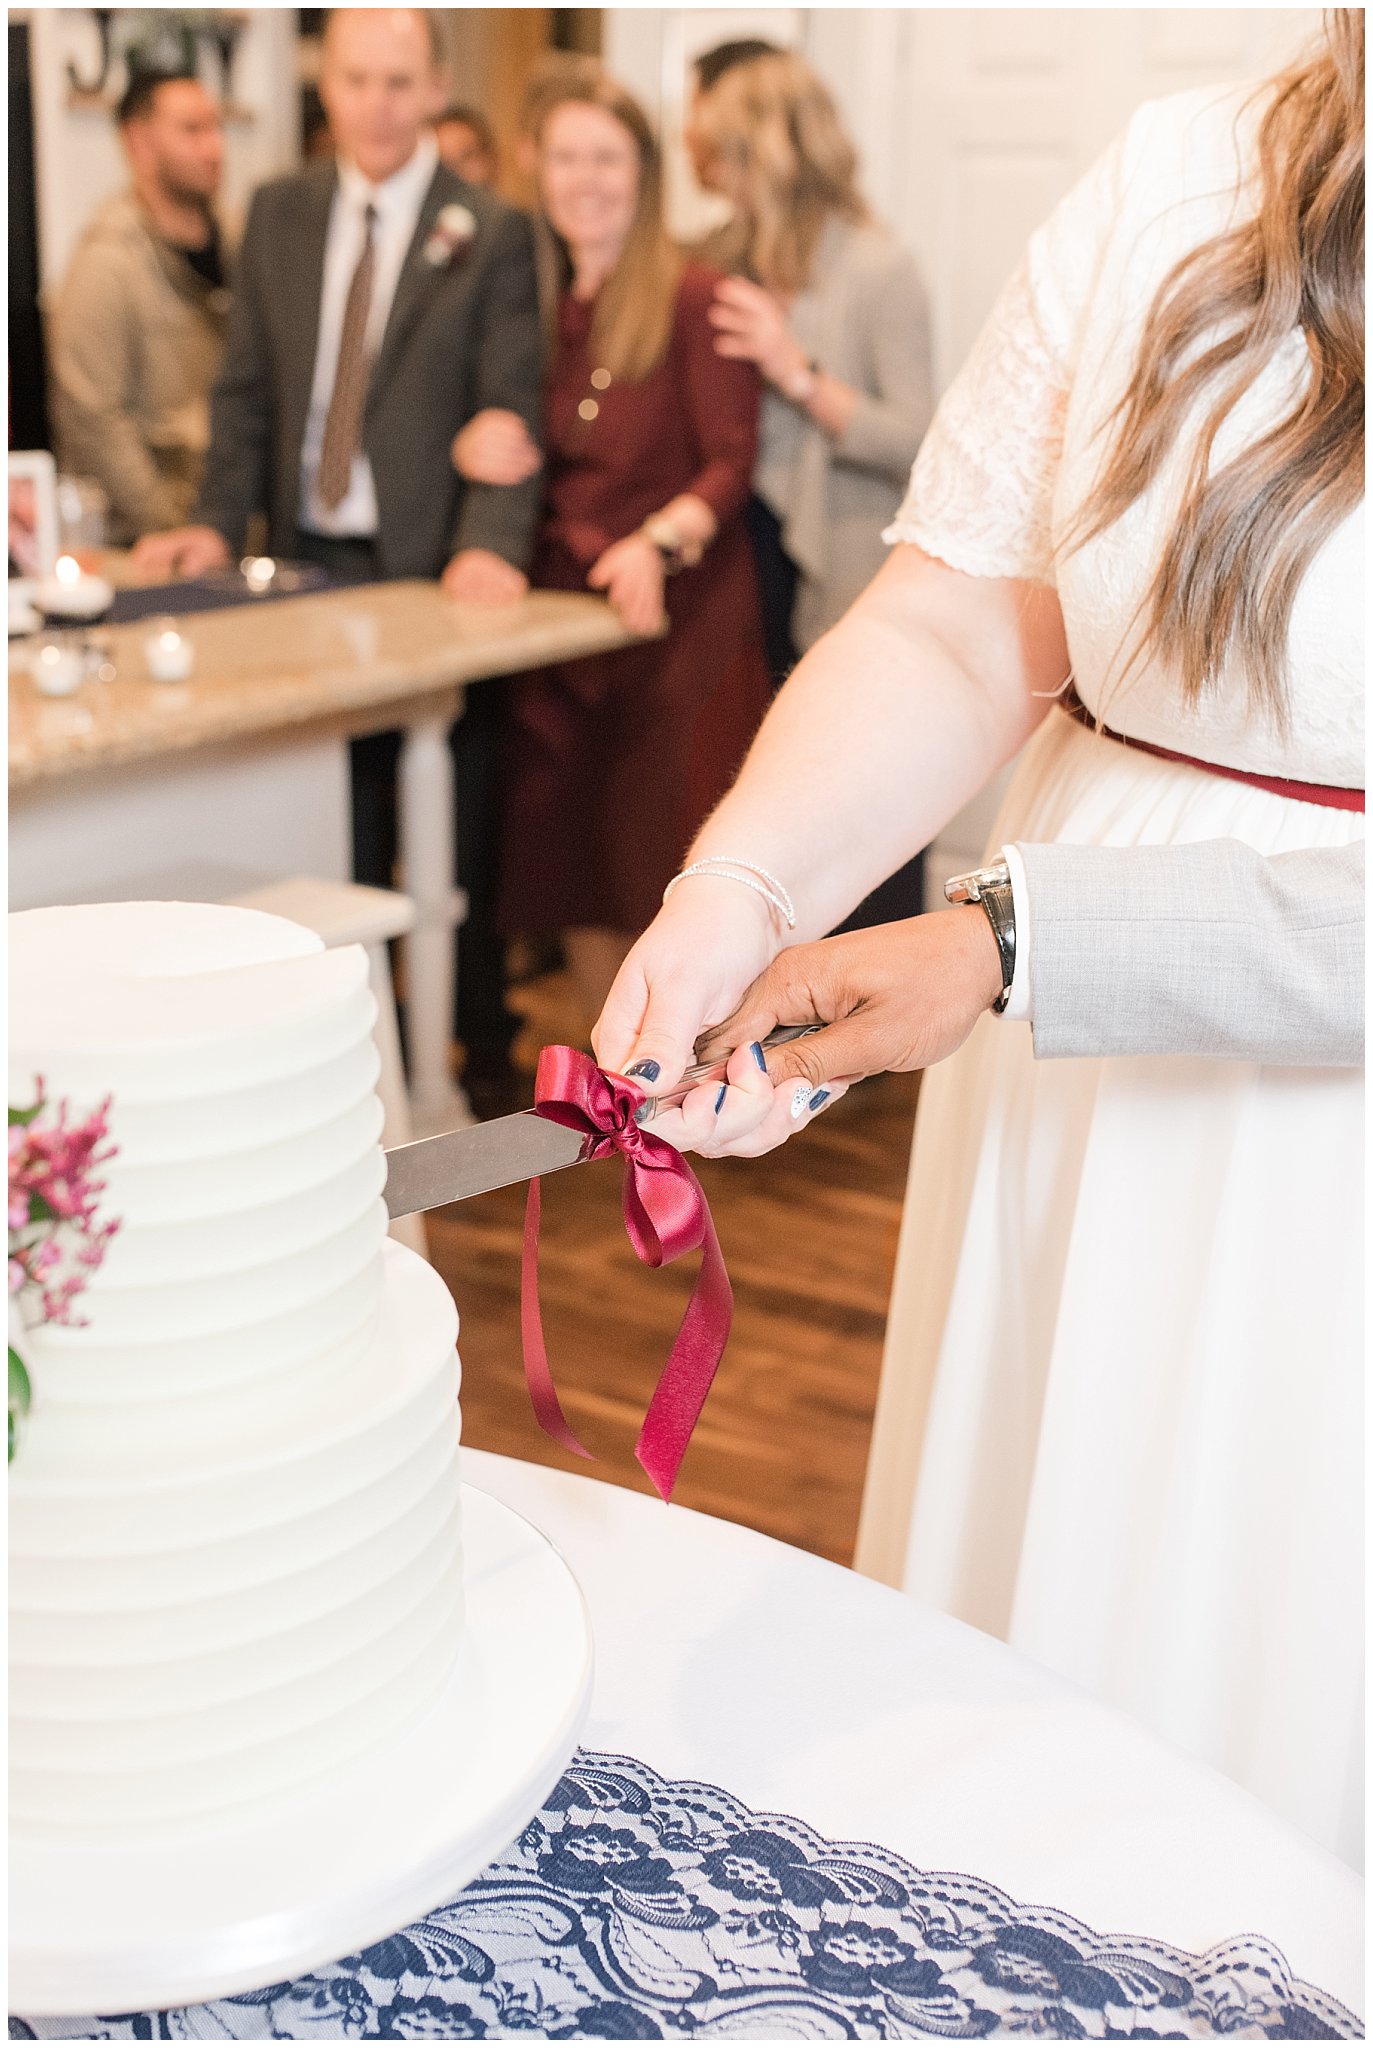 Bride and groom cutting cake by Sweet Cravings at reception | Jordan River Temple Winter wedding and reception | Jessie and Dallin Photography